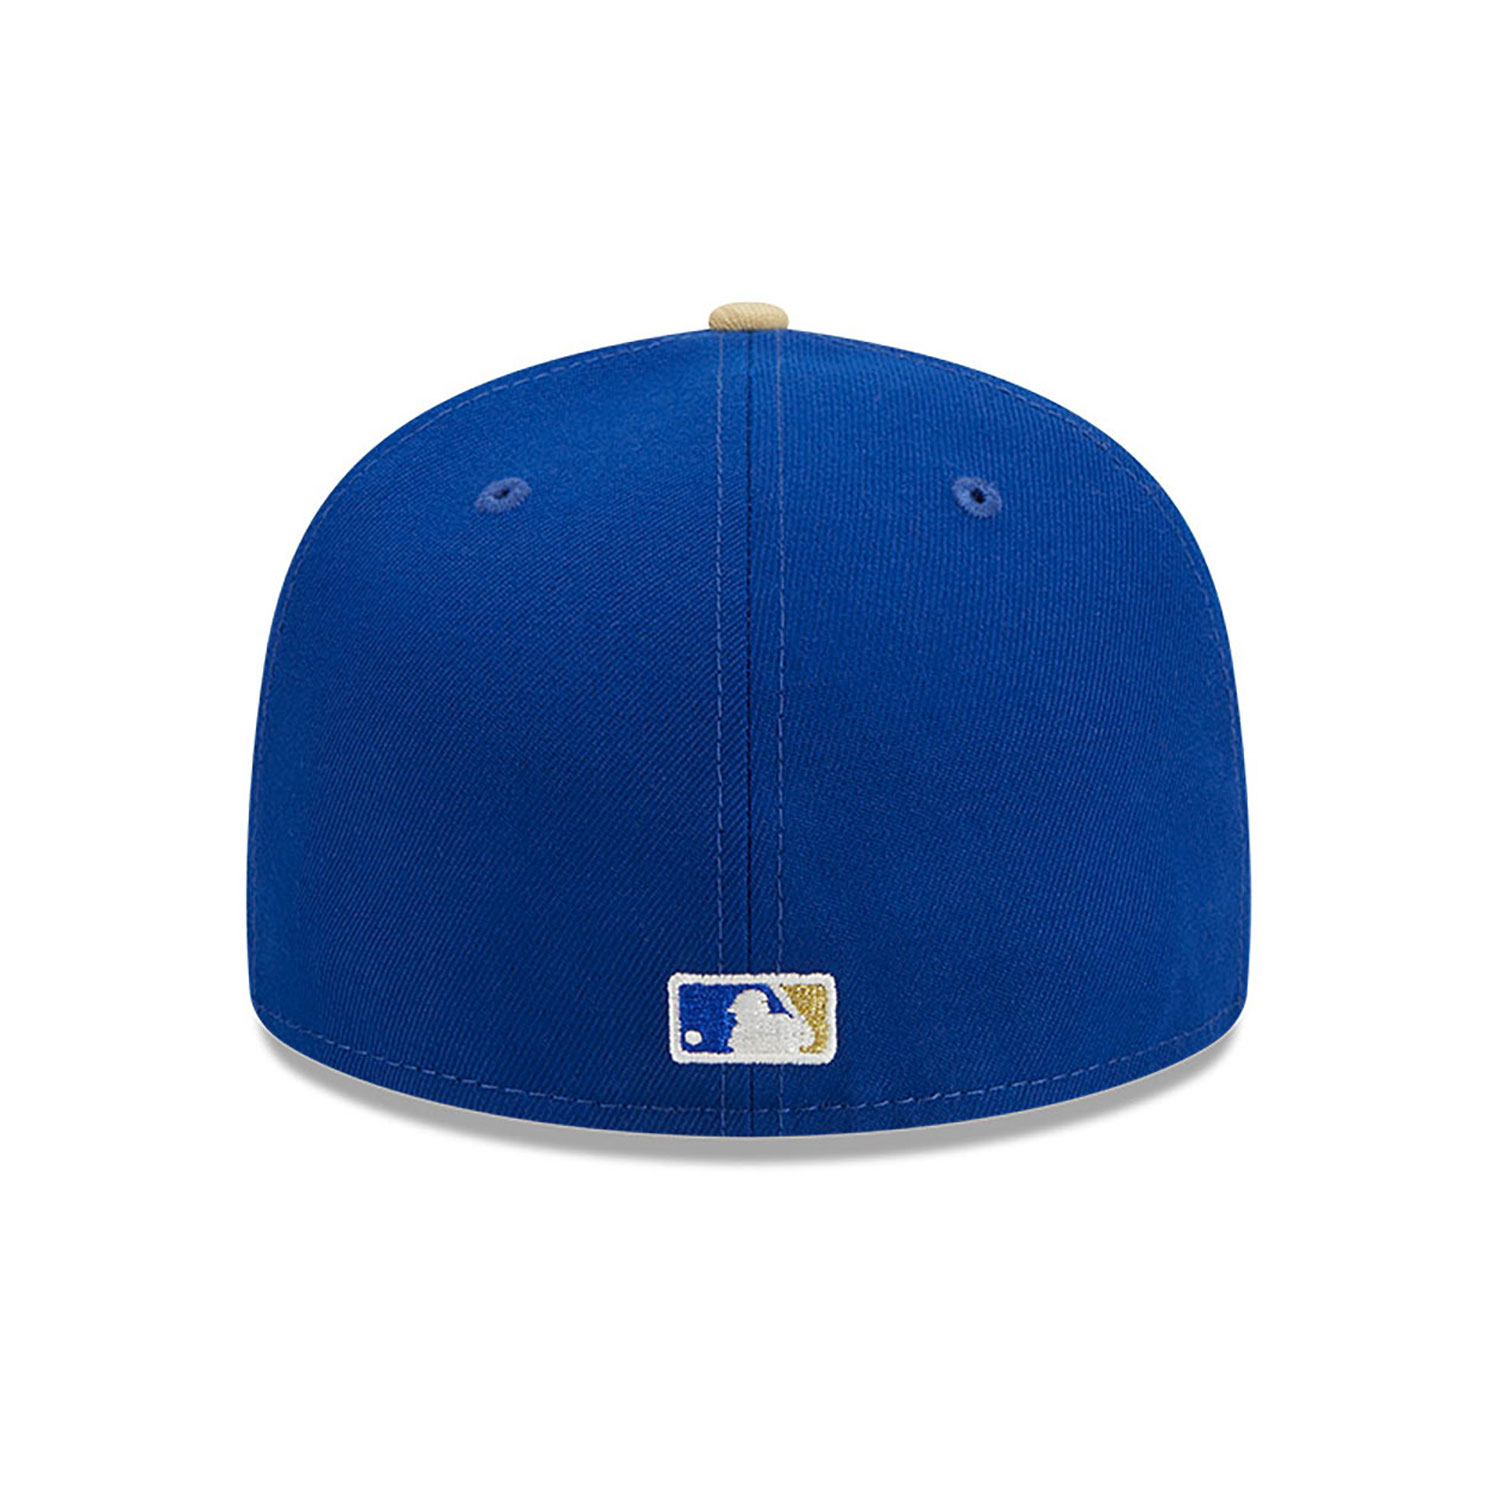 Kansas City Royals City Signature Blue 59FIFTY Fitted Cap